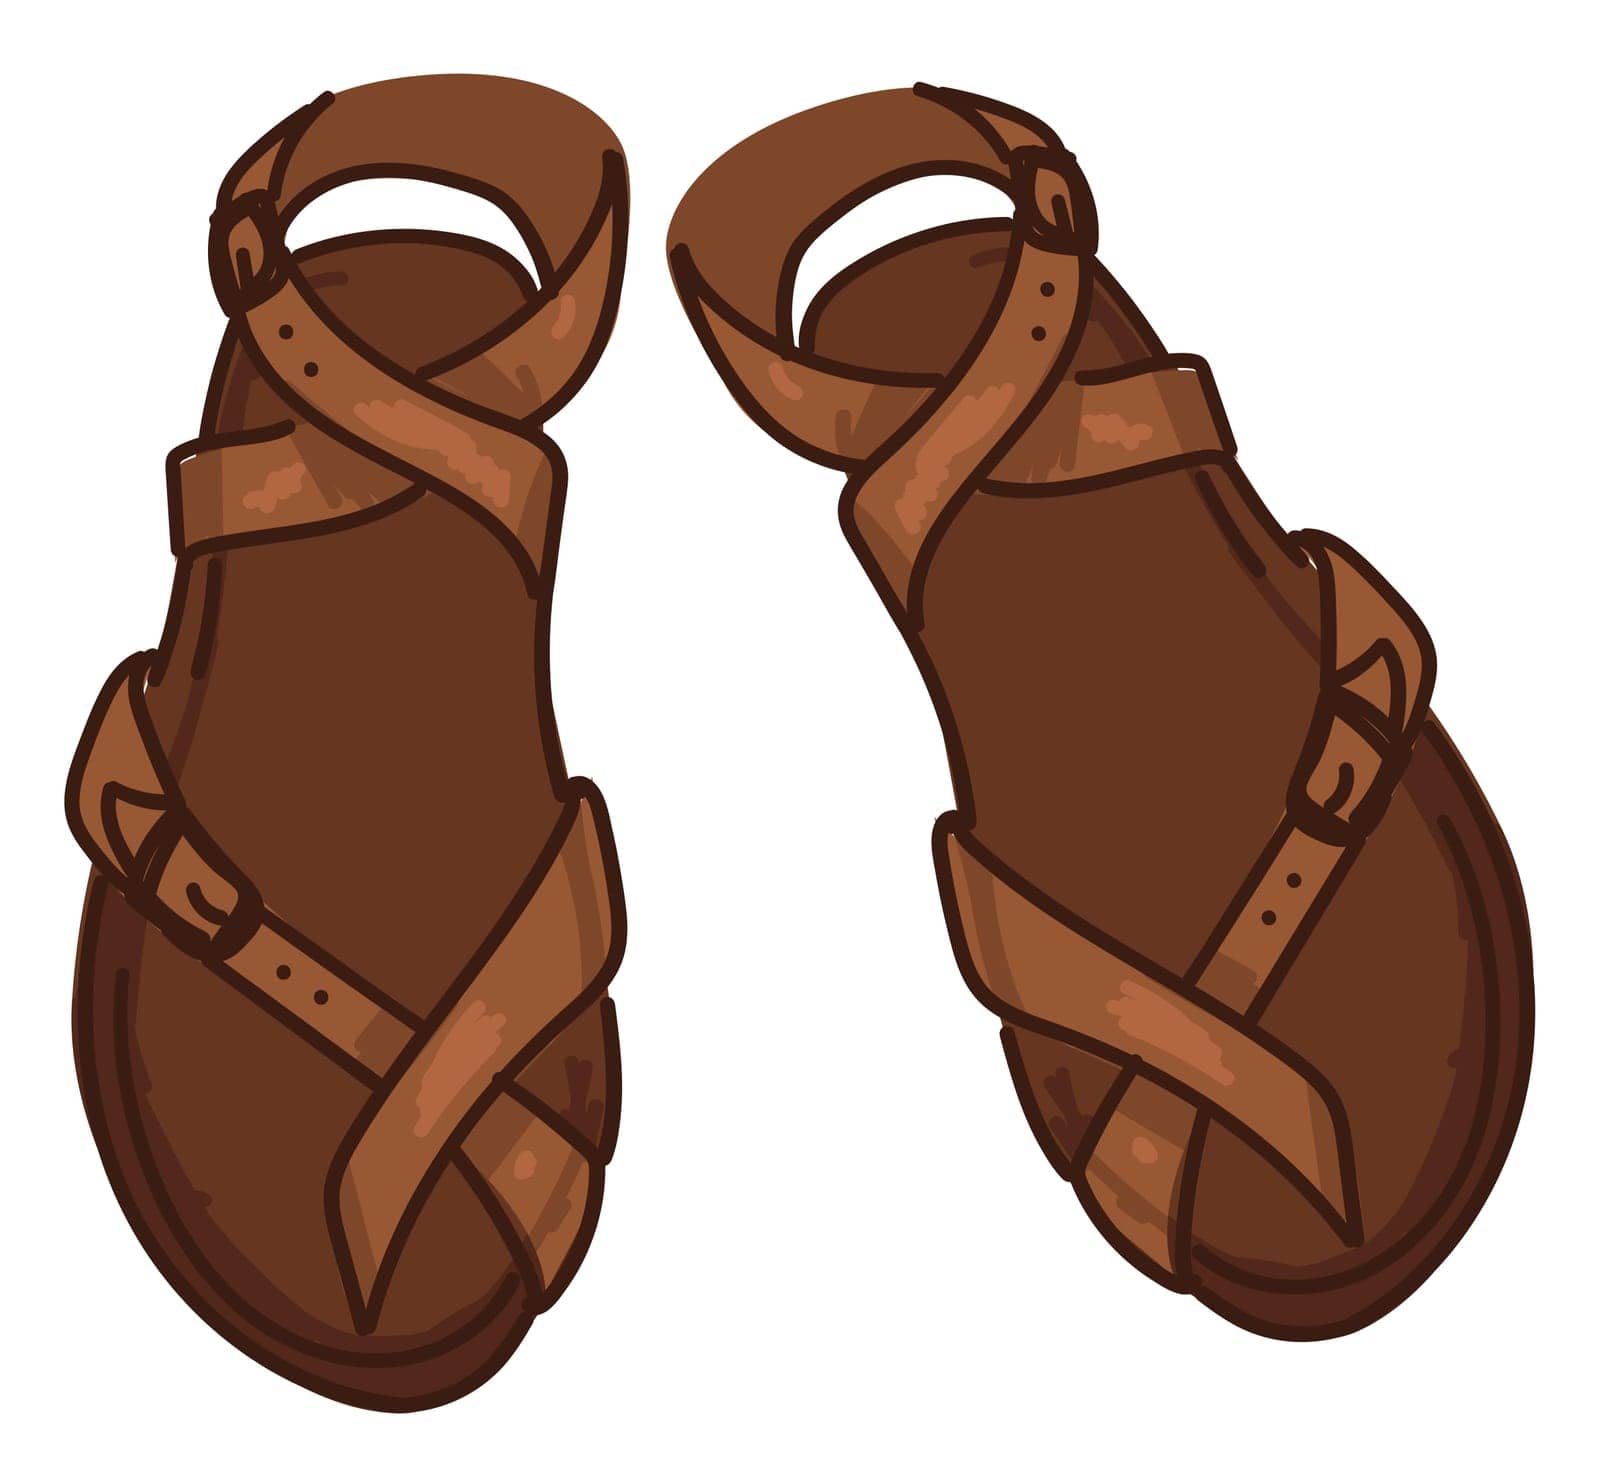 Leather footwear for men or women, isolated pair of shoes, boho clothes. Bohemian or shabby chic clothing, natural materials and simple design of accessories. Sandal for summer. Vector in flat style